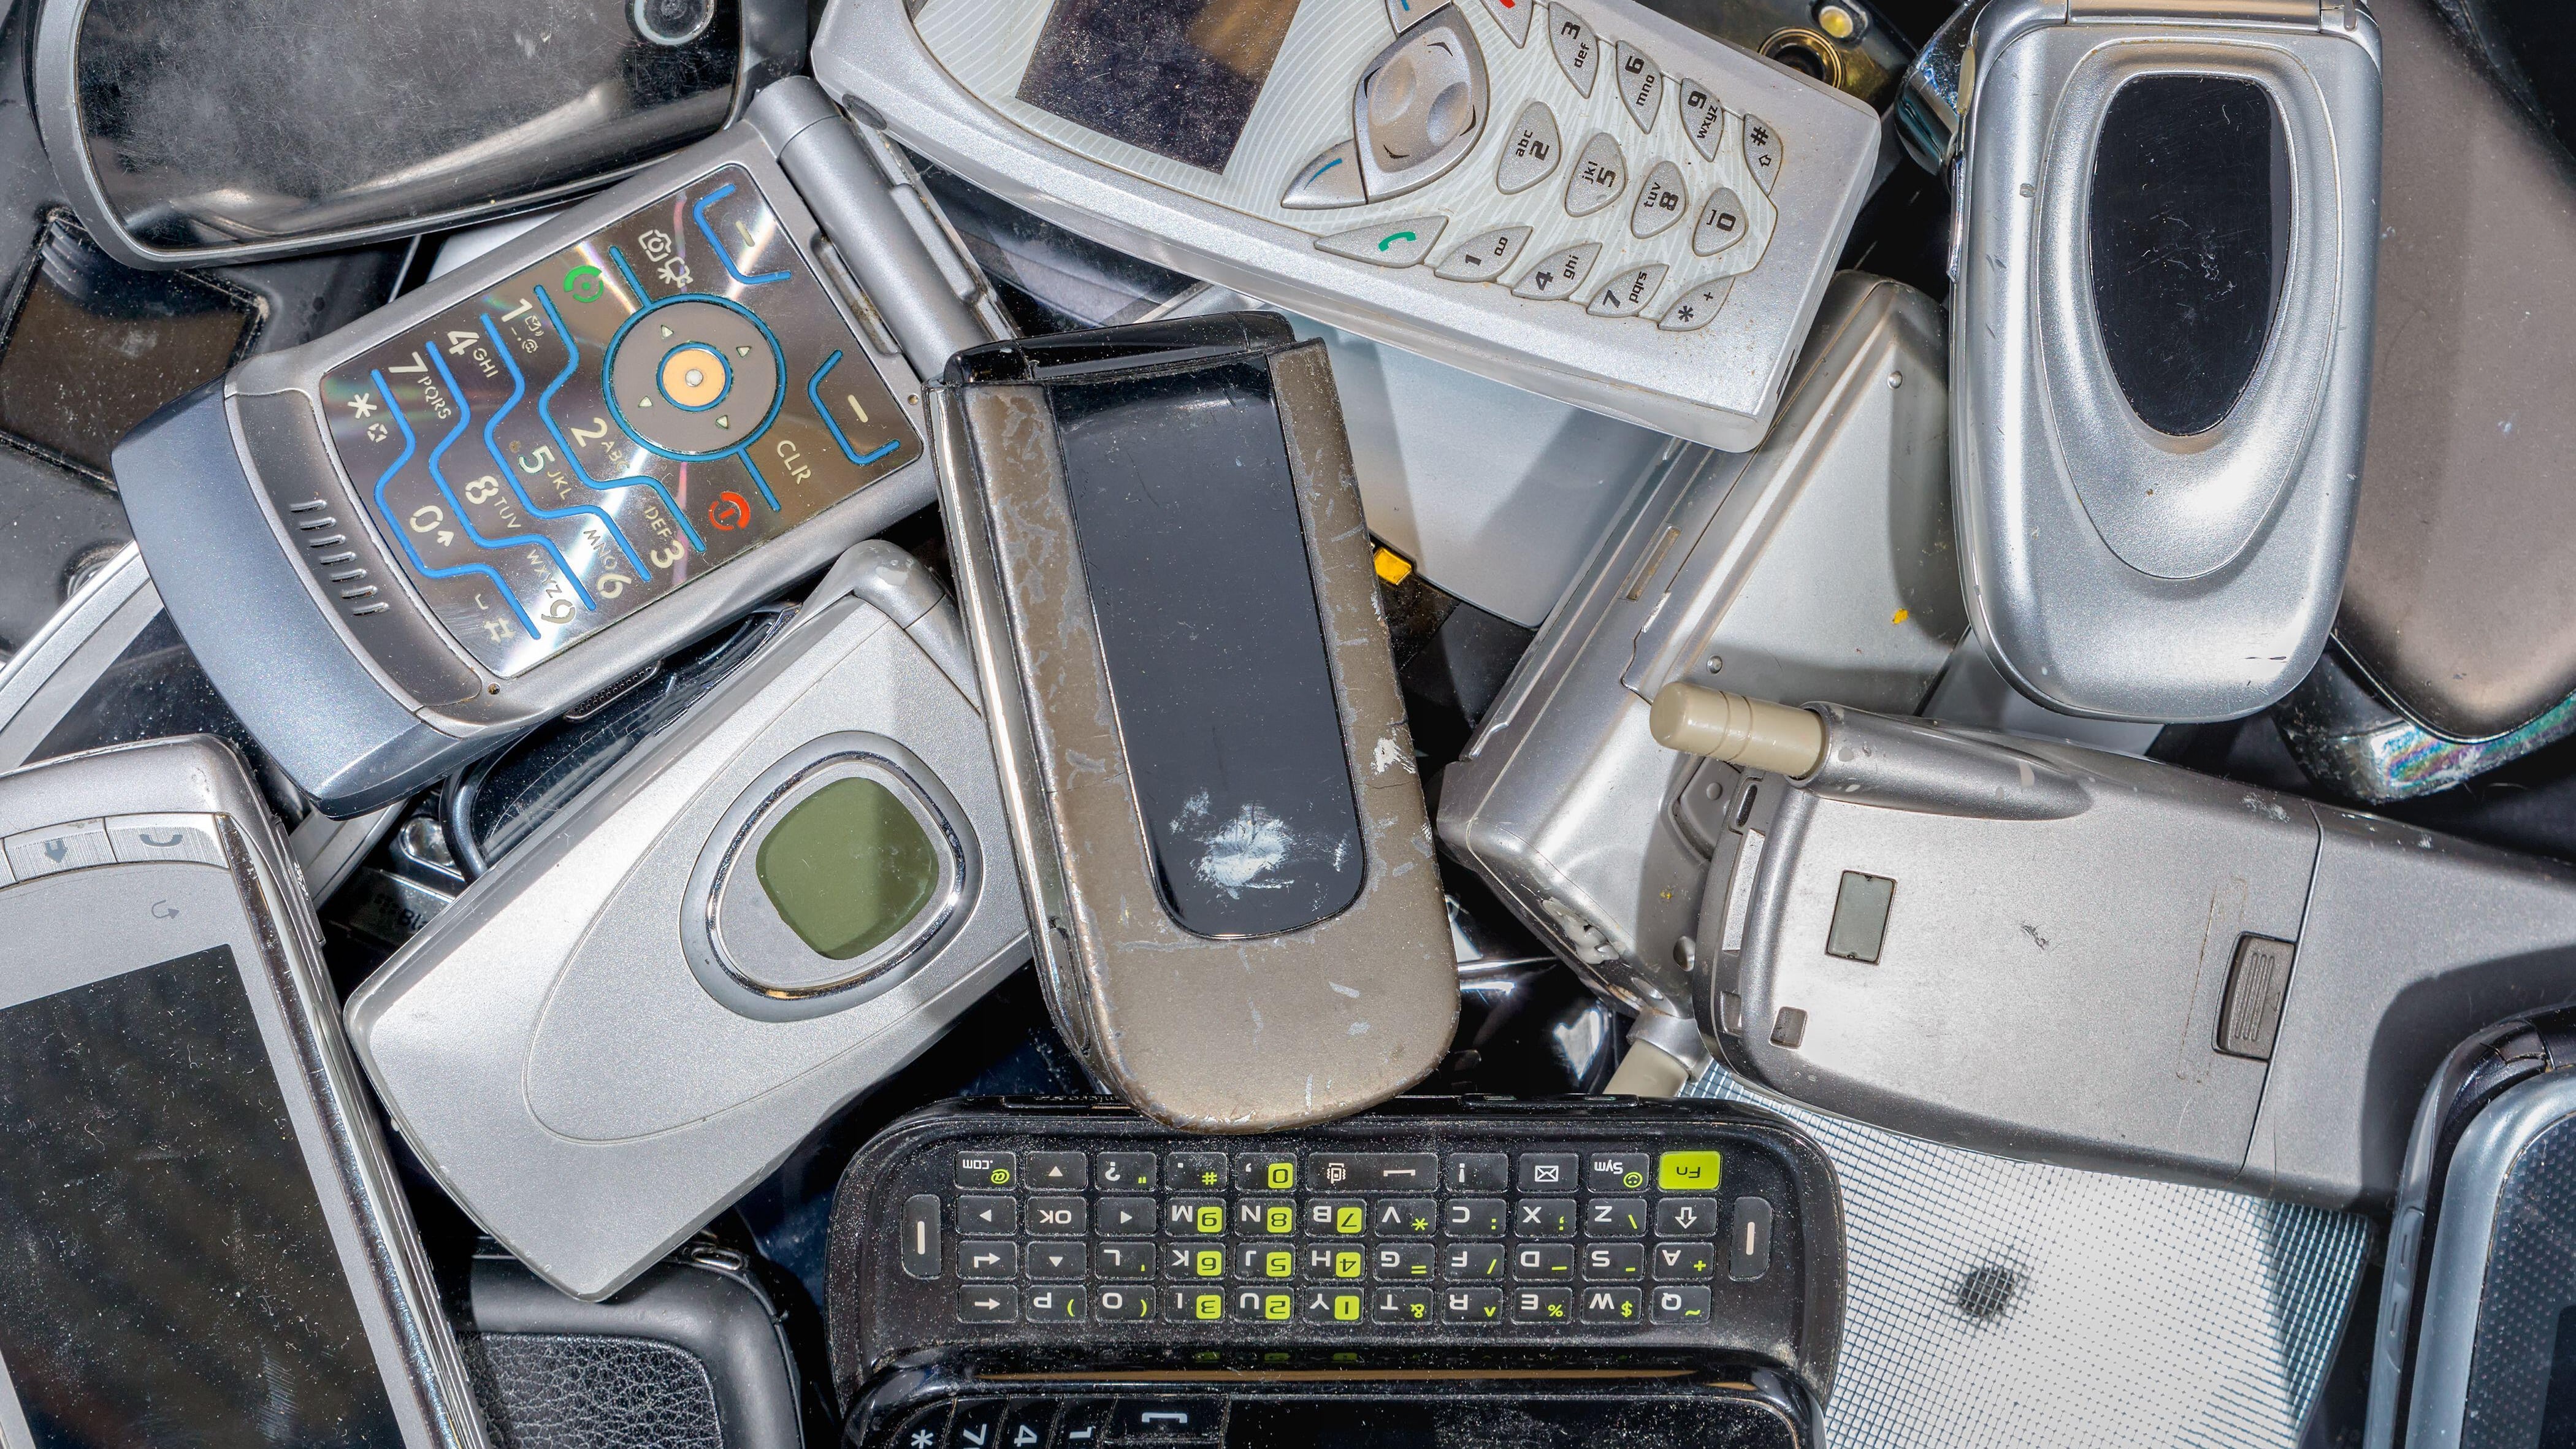 MPs have warned the Government over concerns it is not fully grasping the scale of Britain’s e-waste problem